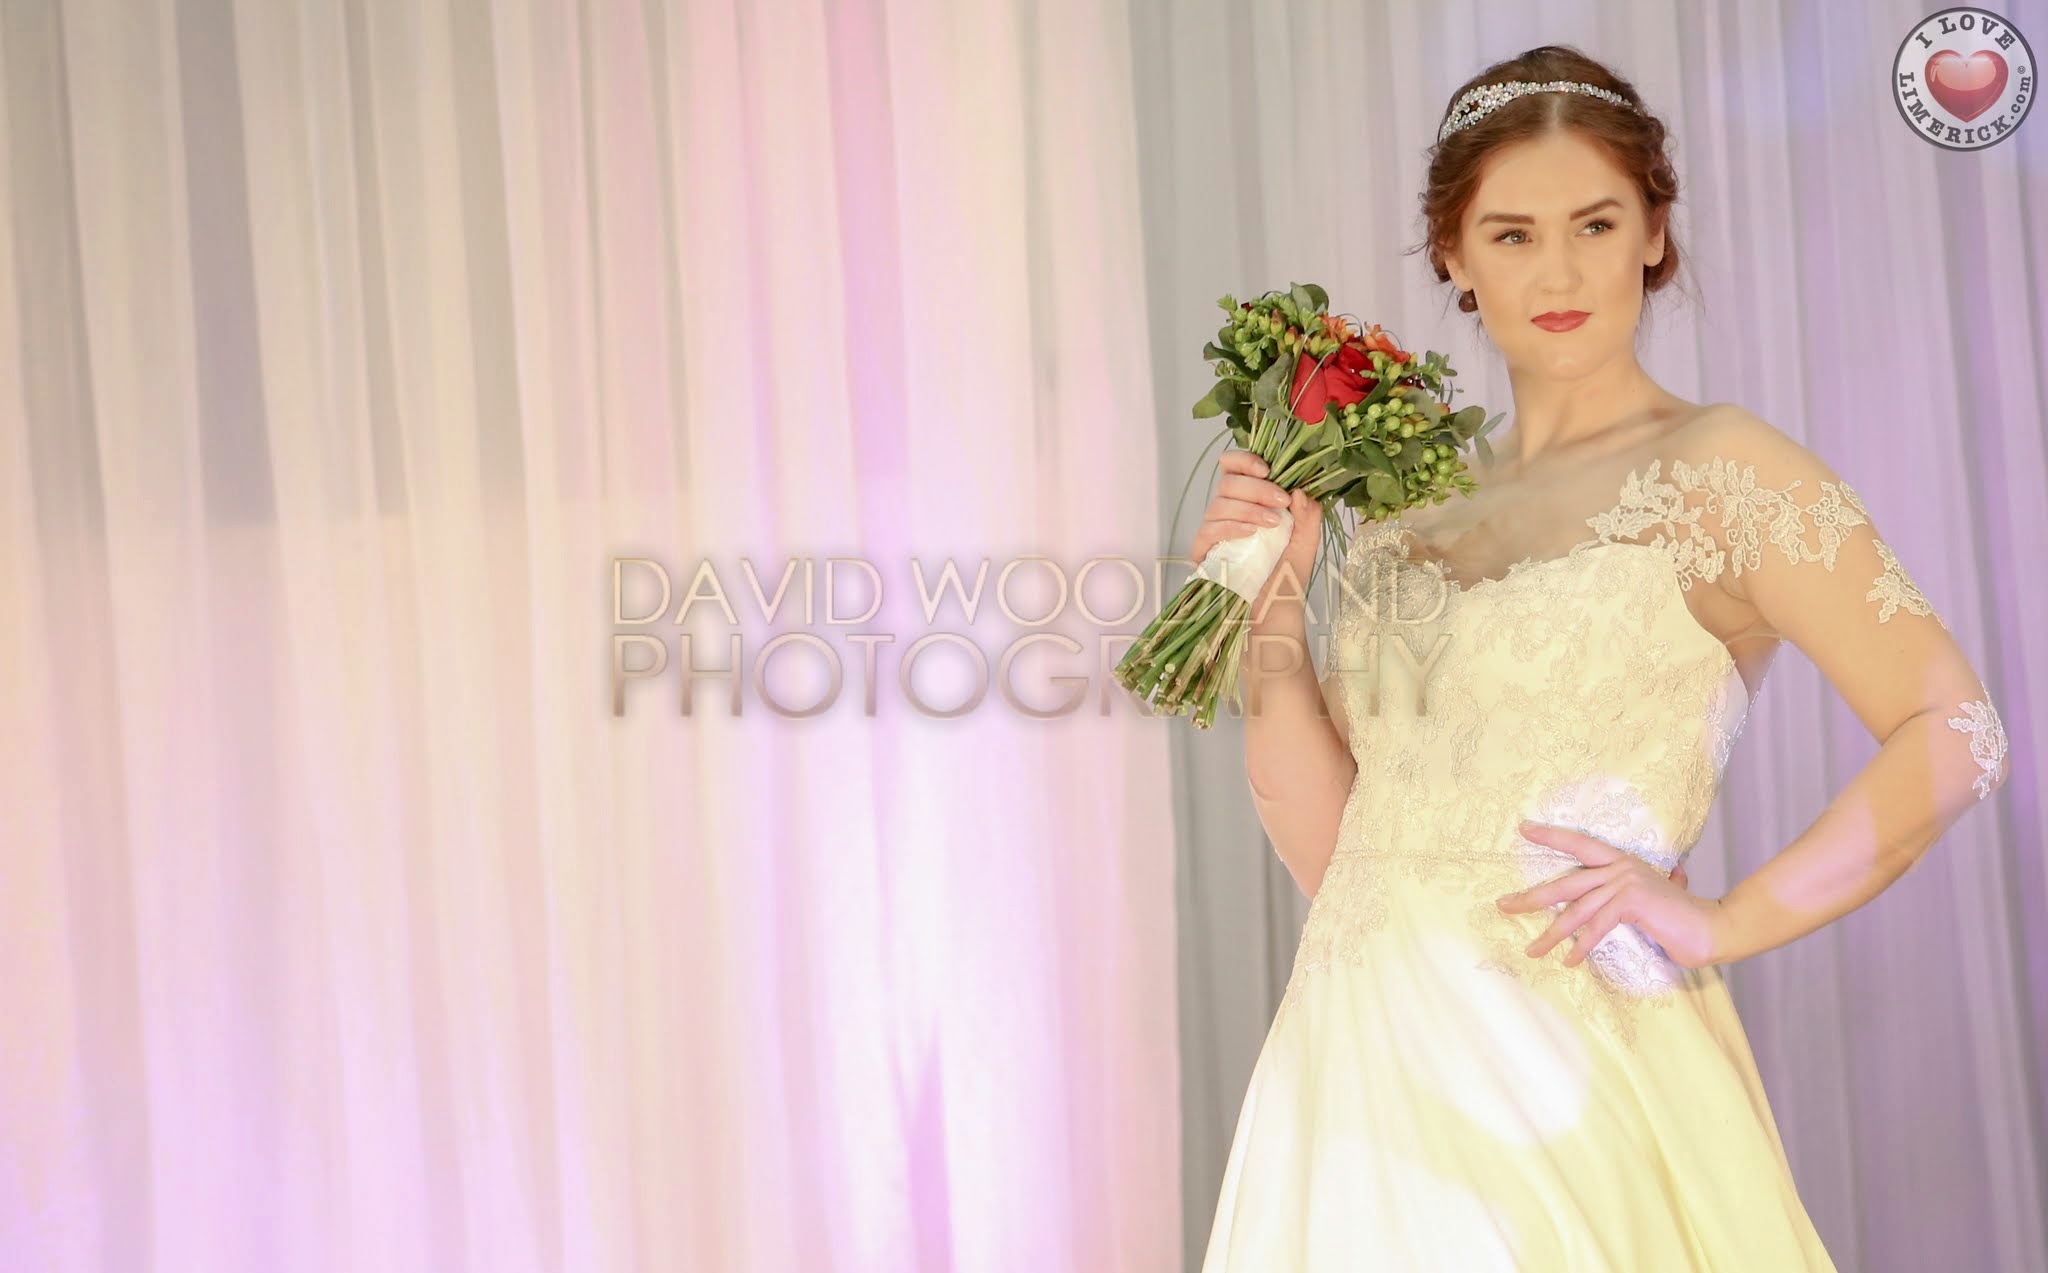 Mid-West-Bridal-Exhibition-2015.-Day-1.-DW-68